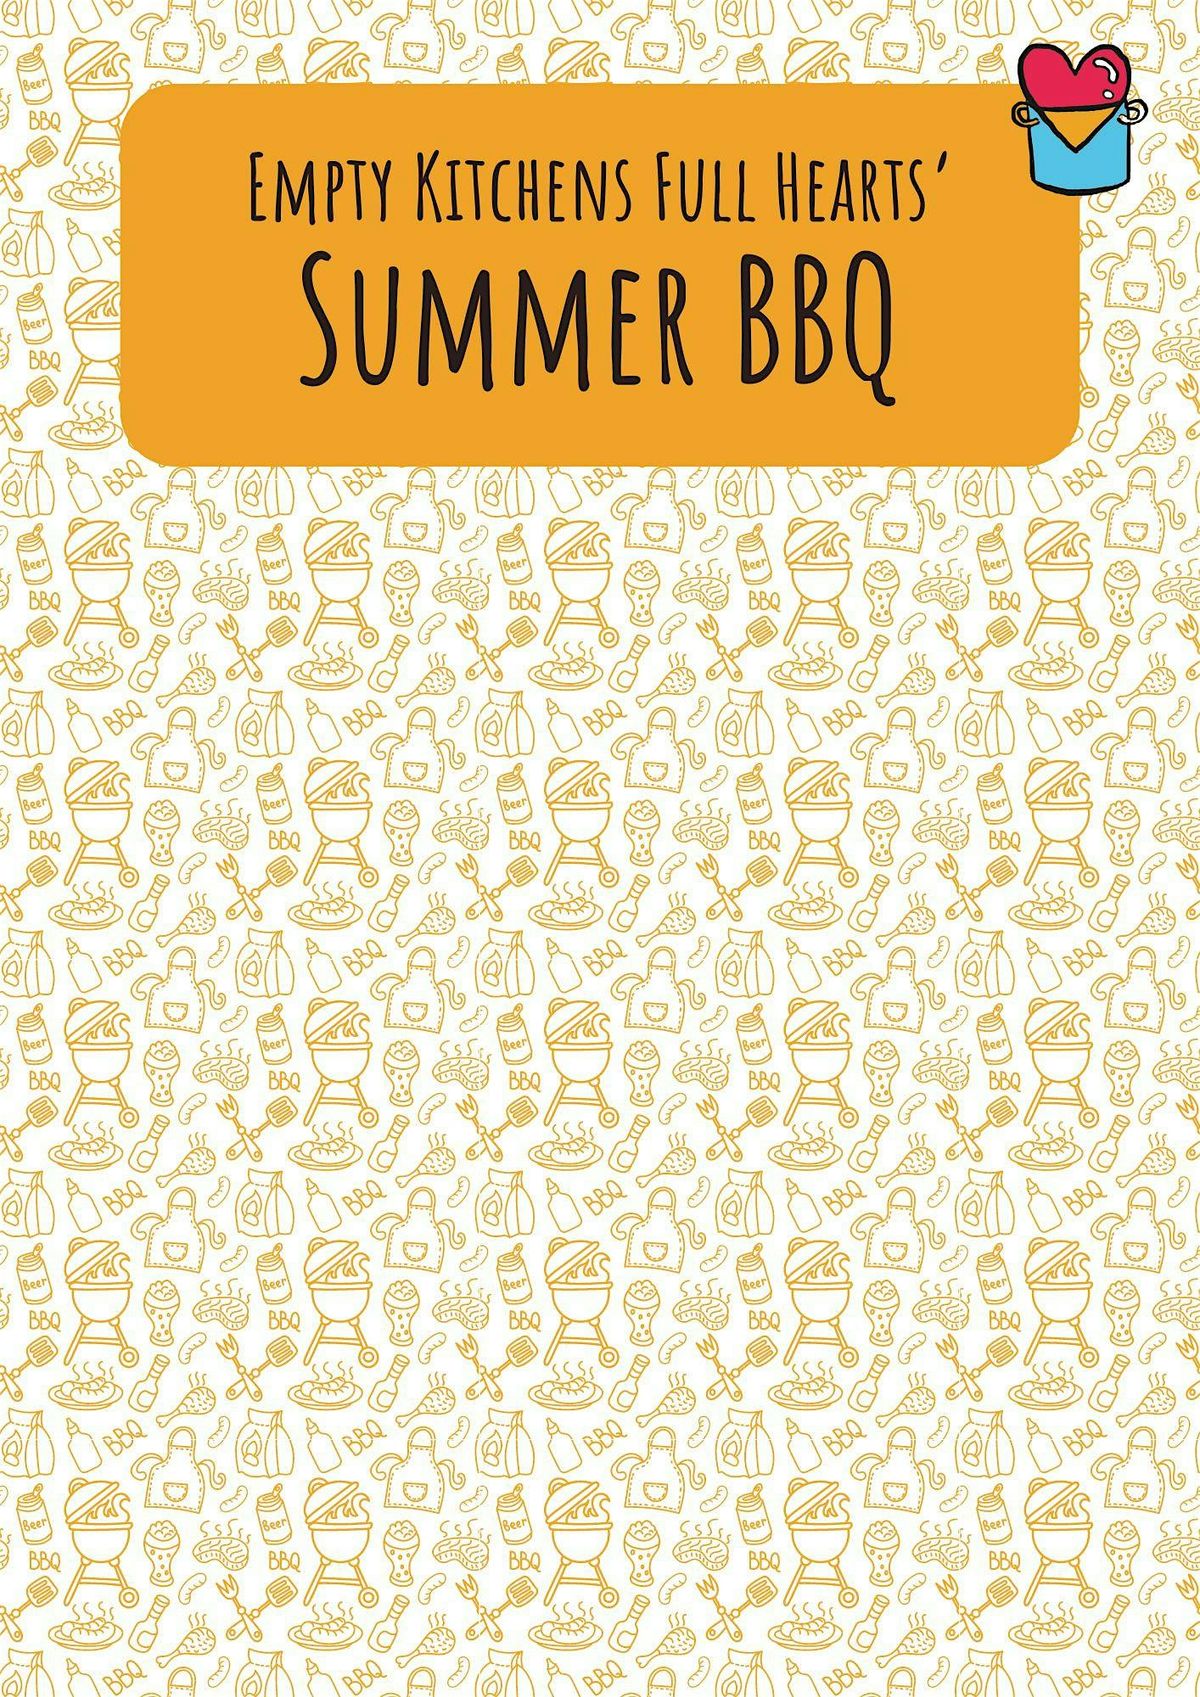 Summer BBQ - All welcome!